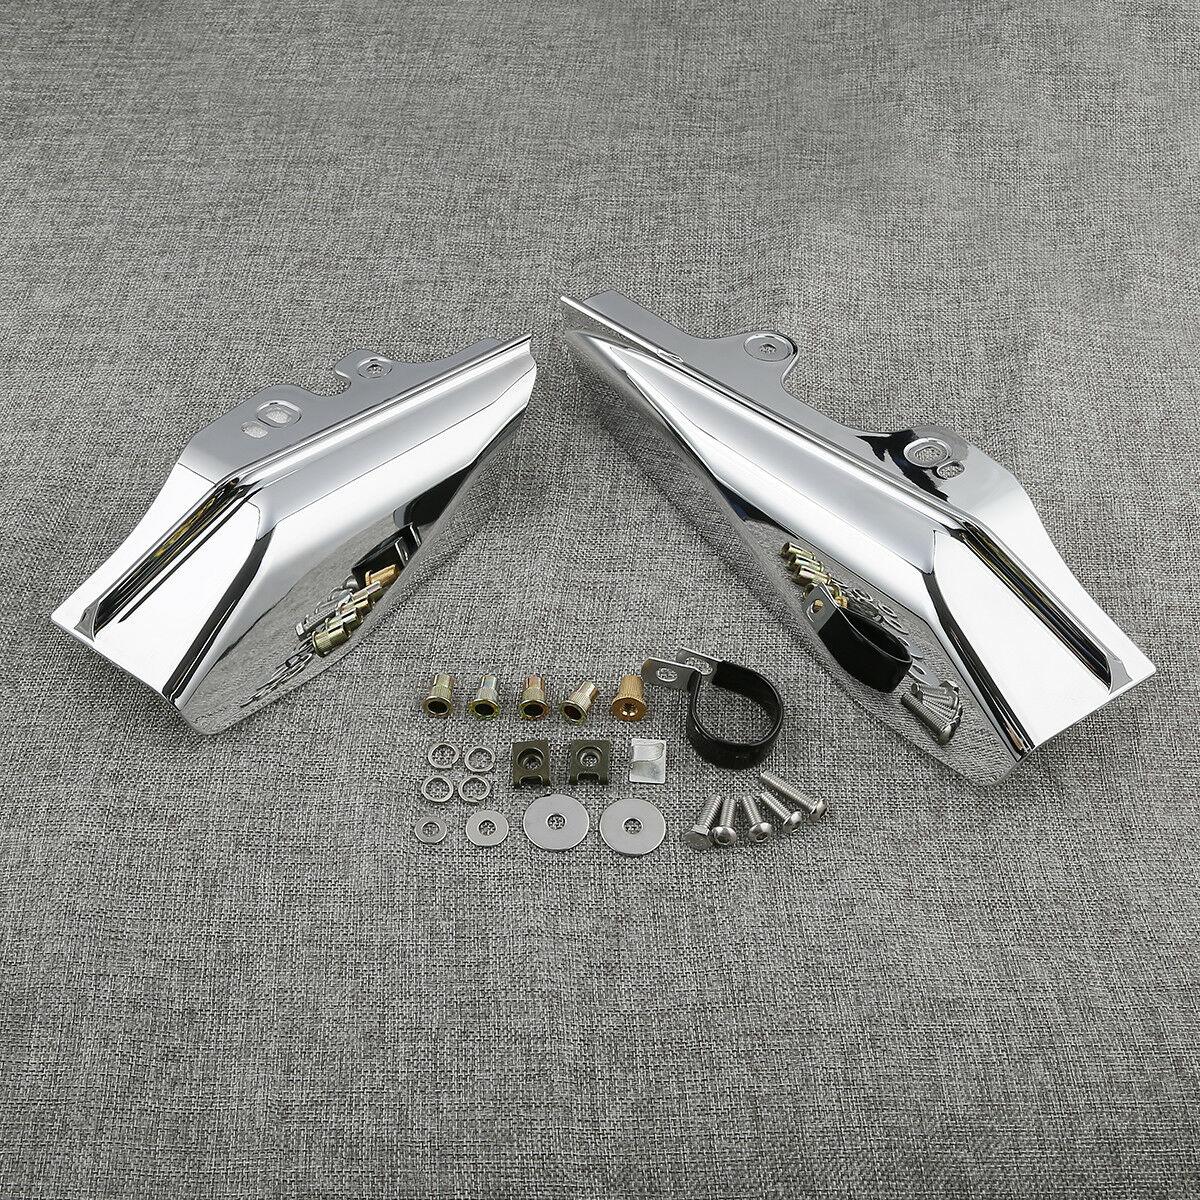 New Mid-Frame Air Deflector For Harley Touring Davidson Touring Models 2001-2008 - Moto Life Products